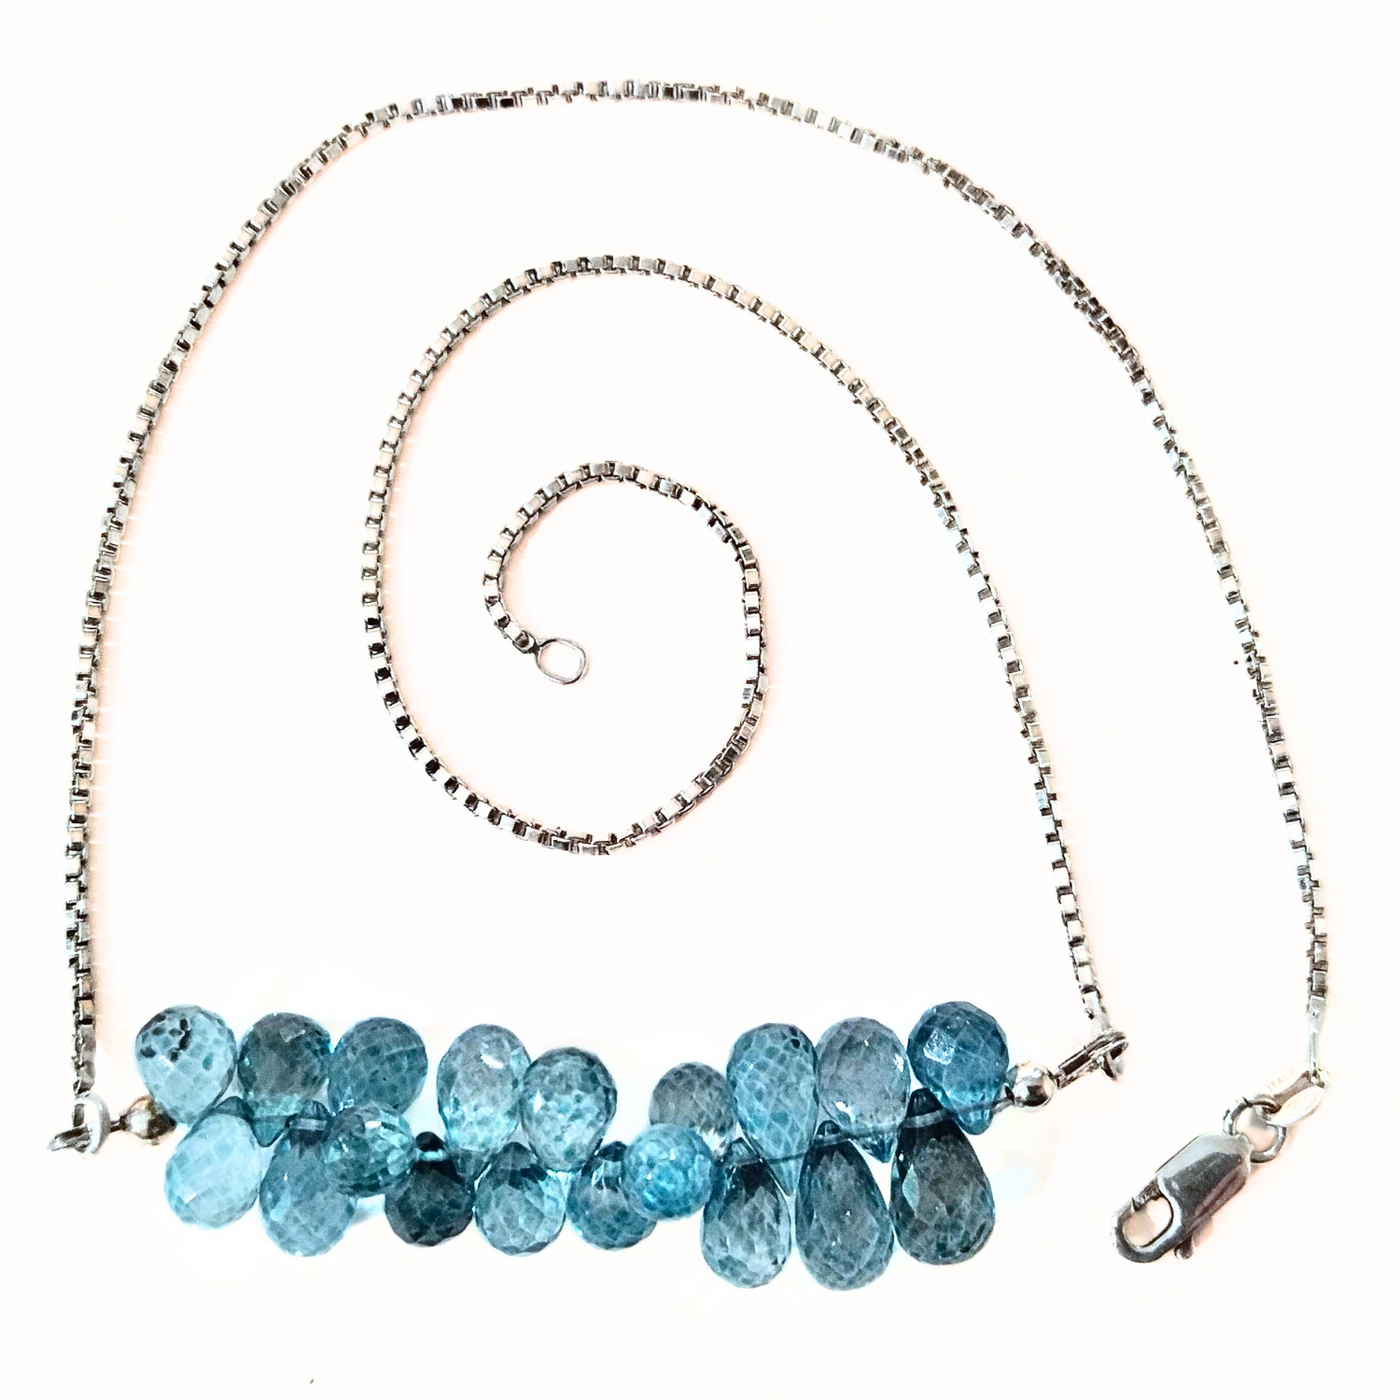 SM-321 London Blue Bead Necklace Sterling